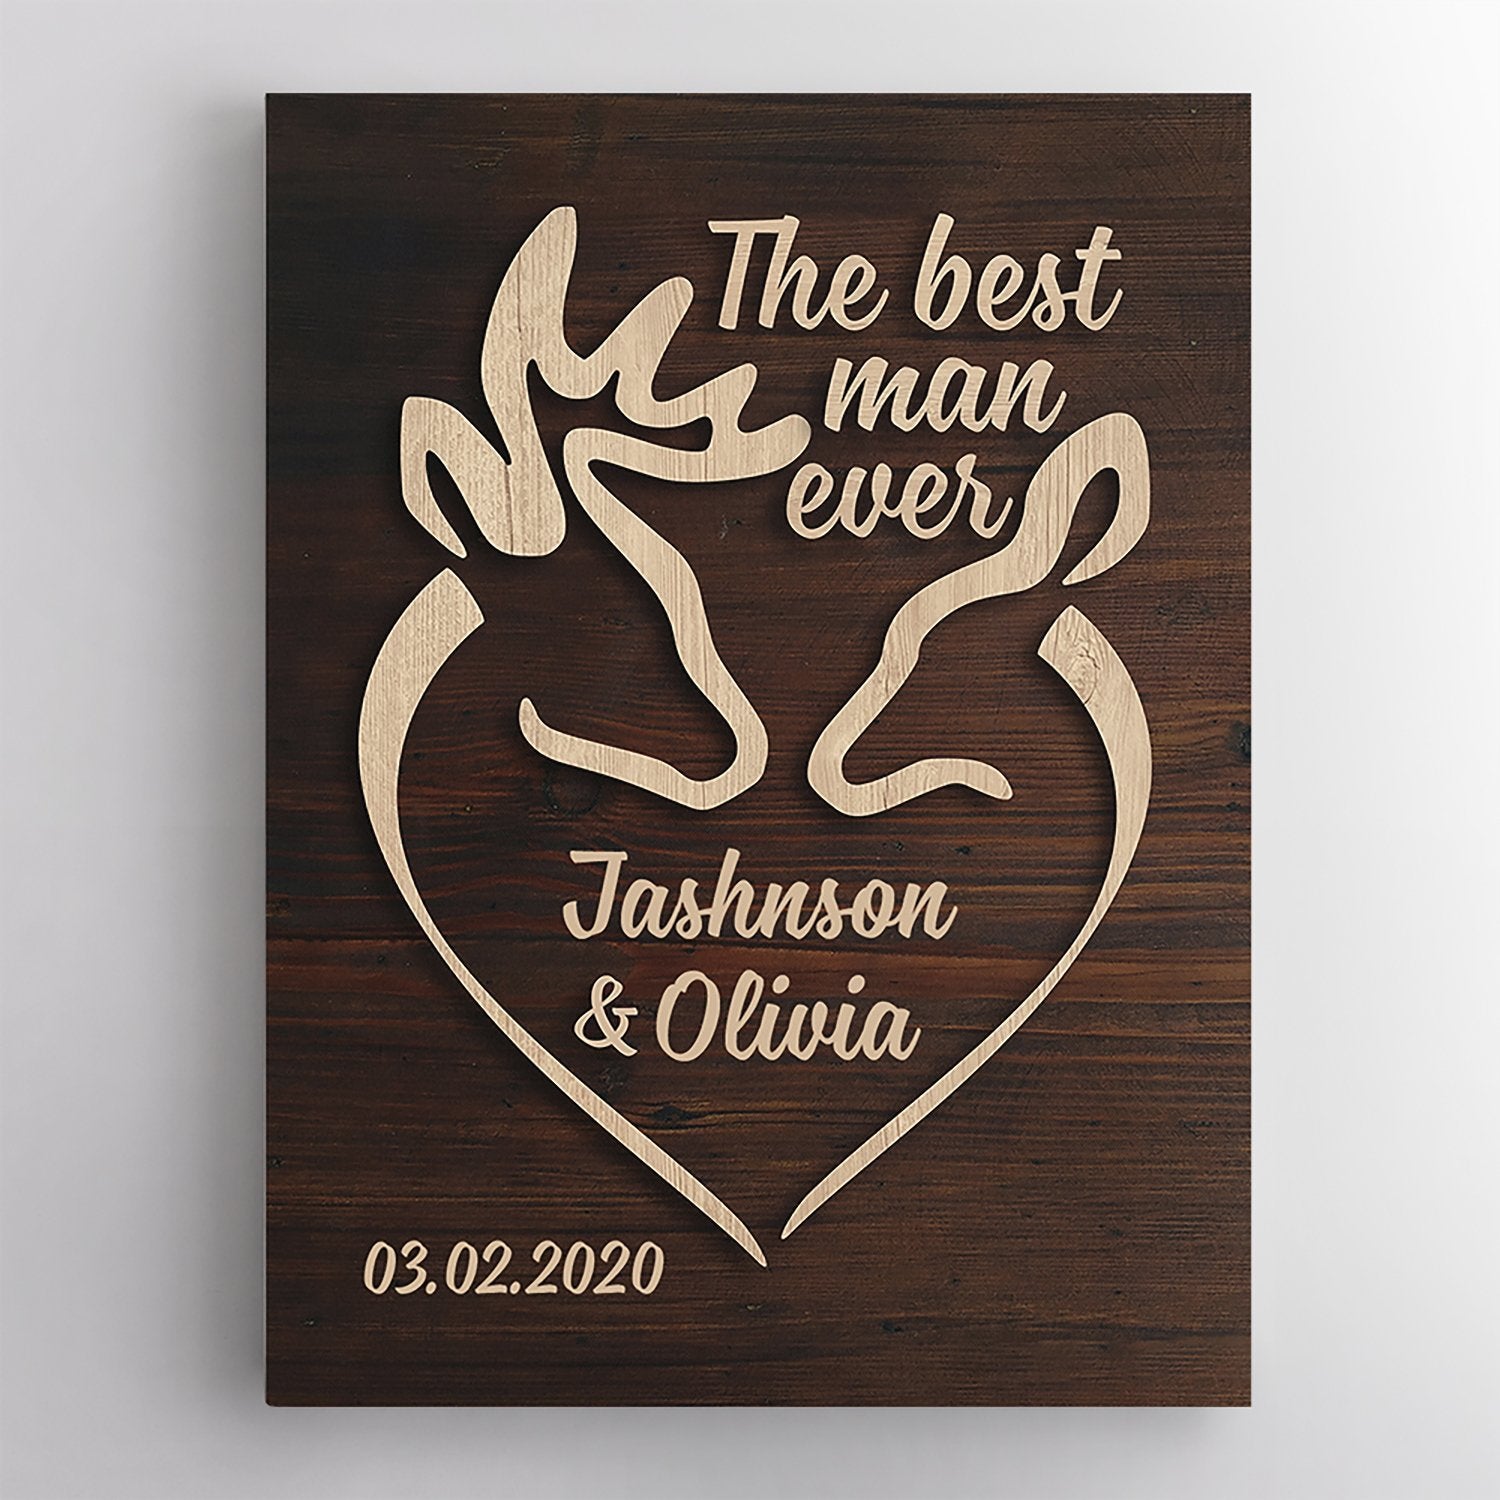 After all the fights, the struggles and the joy you have shared so far, you wanna say “Thank you for being my best man” to him? So, what better way to let him know your feelings than with this vertical wall decor idea? Your unconditional love and affection are greatly presented with two deer on the canvas print. 